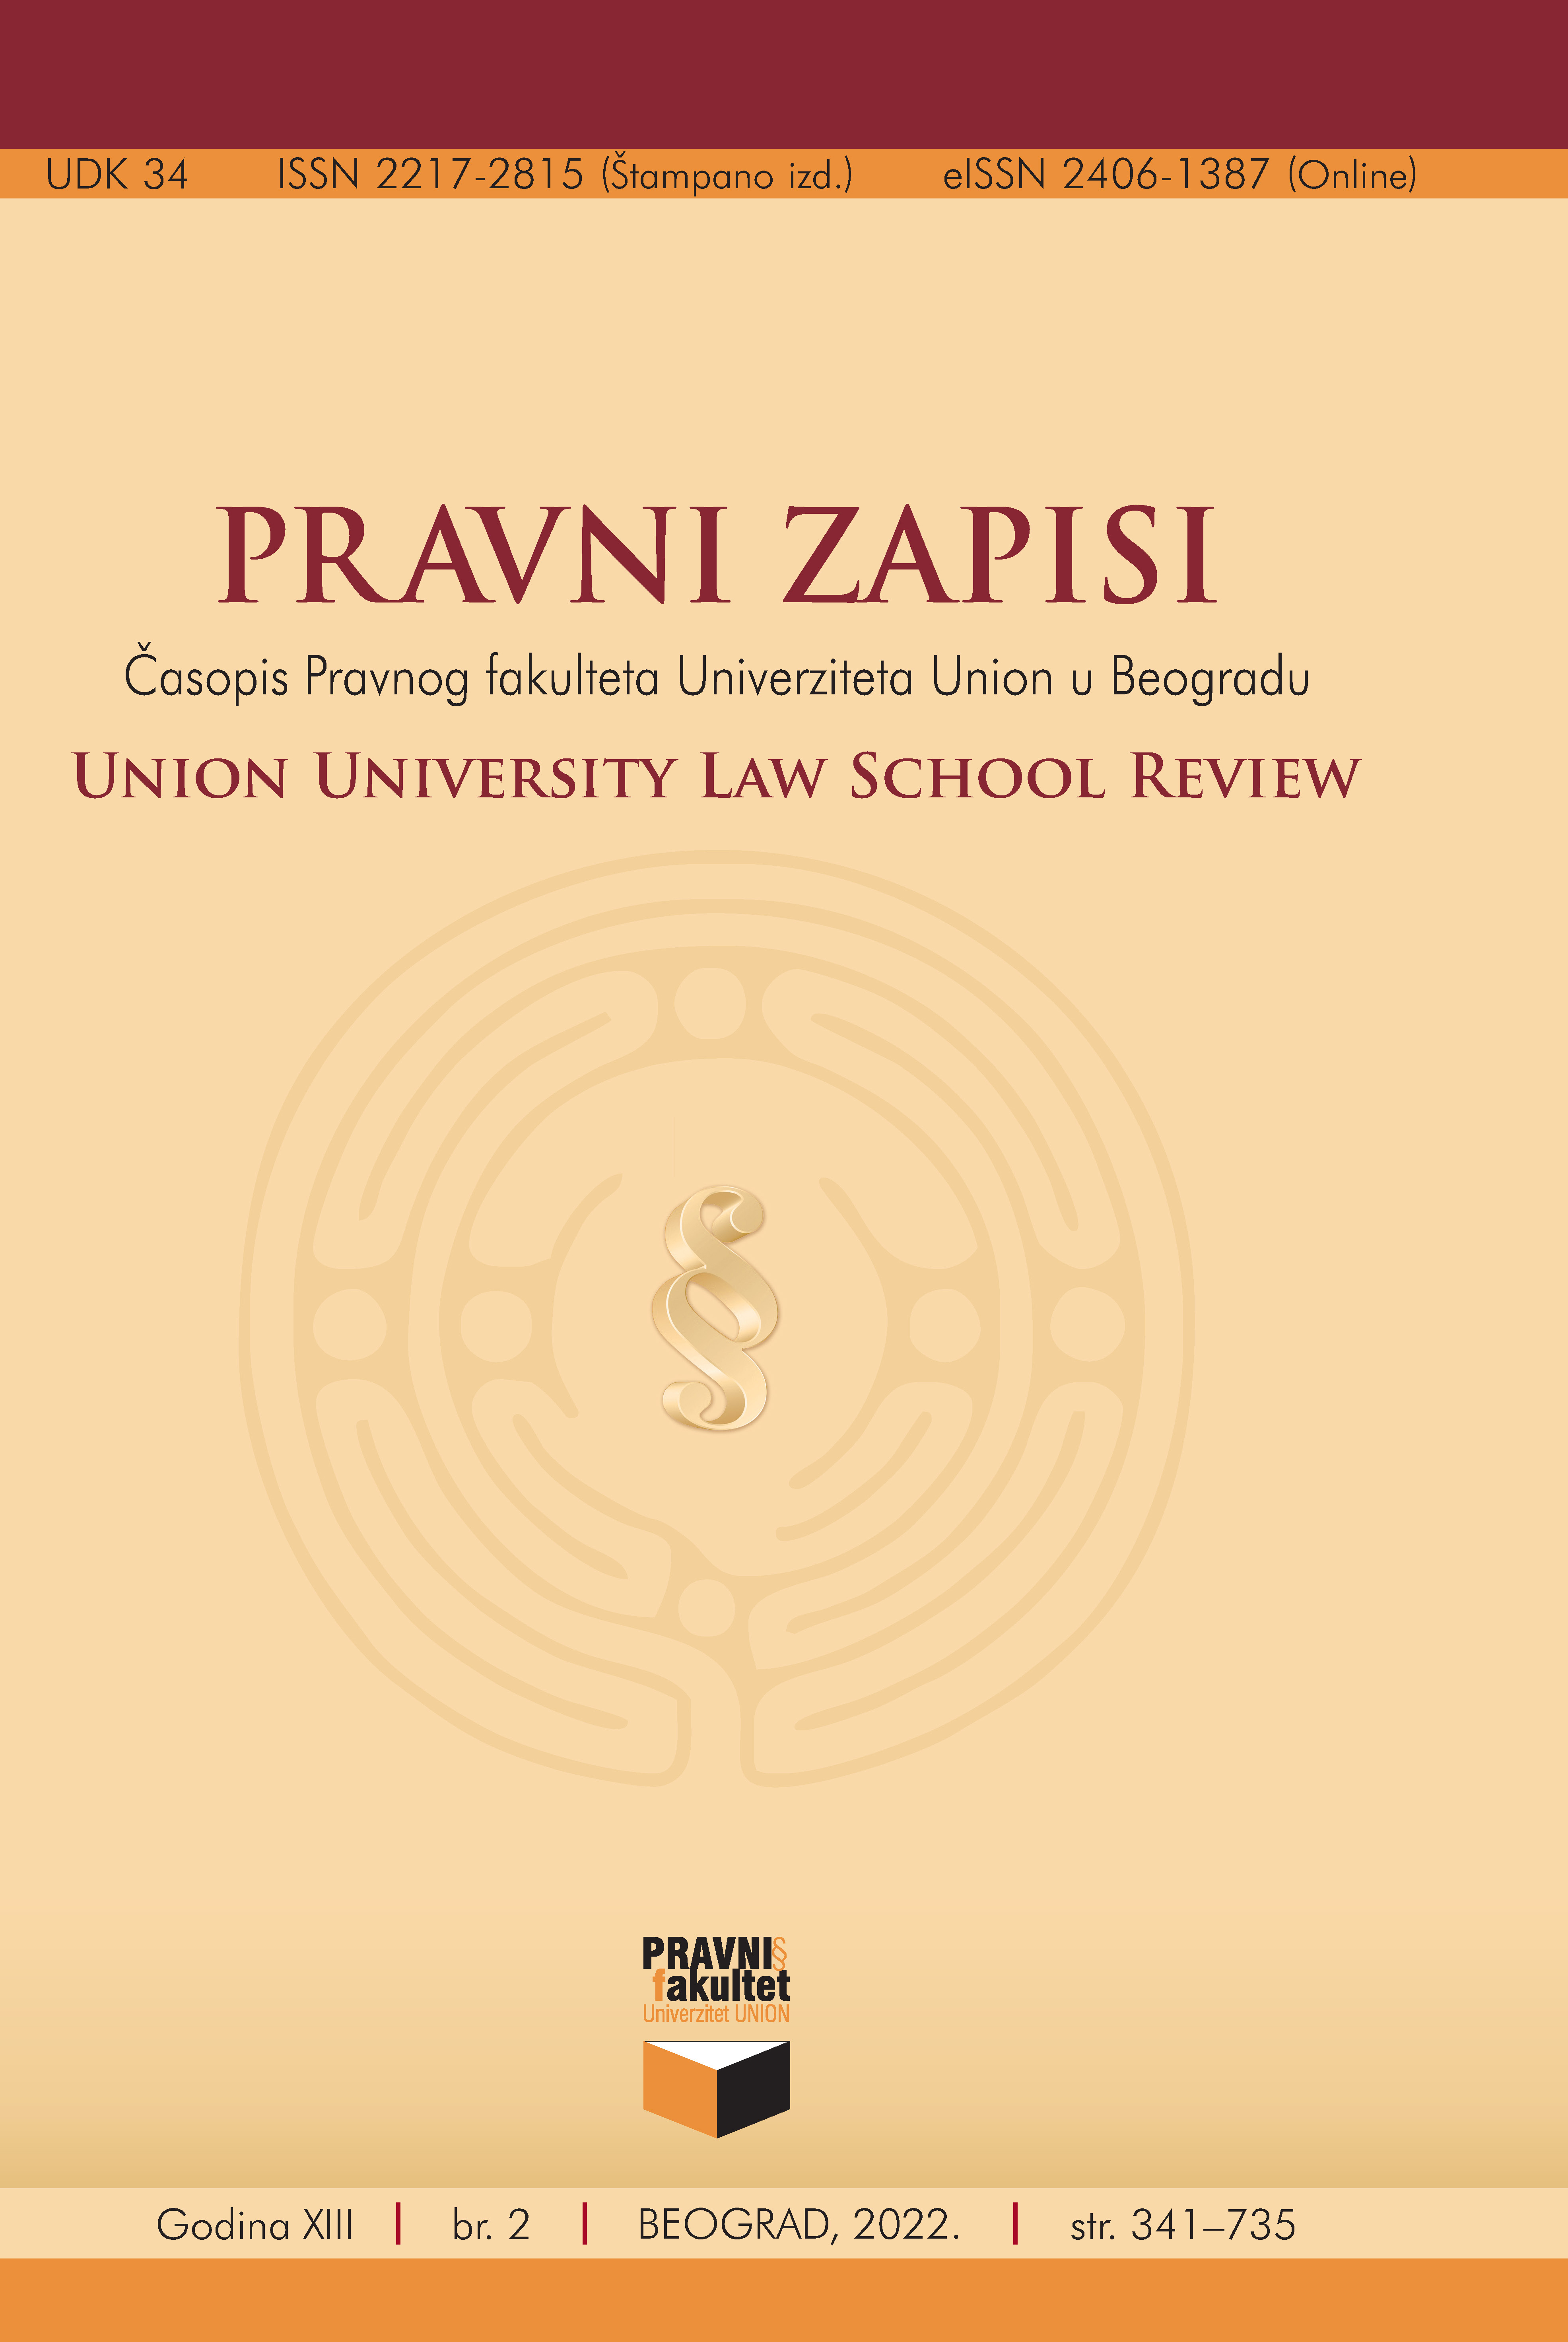 Catechism Without God: Legal Basis and Ideological Premises of Teaching Marxism in Schools of Socialist Yugoslavia from 1945 to 1991